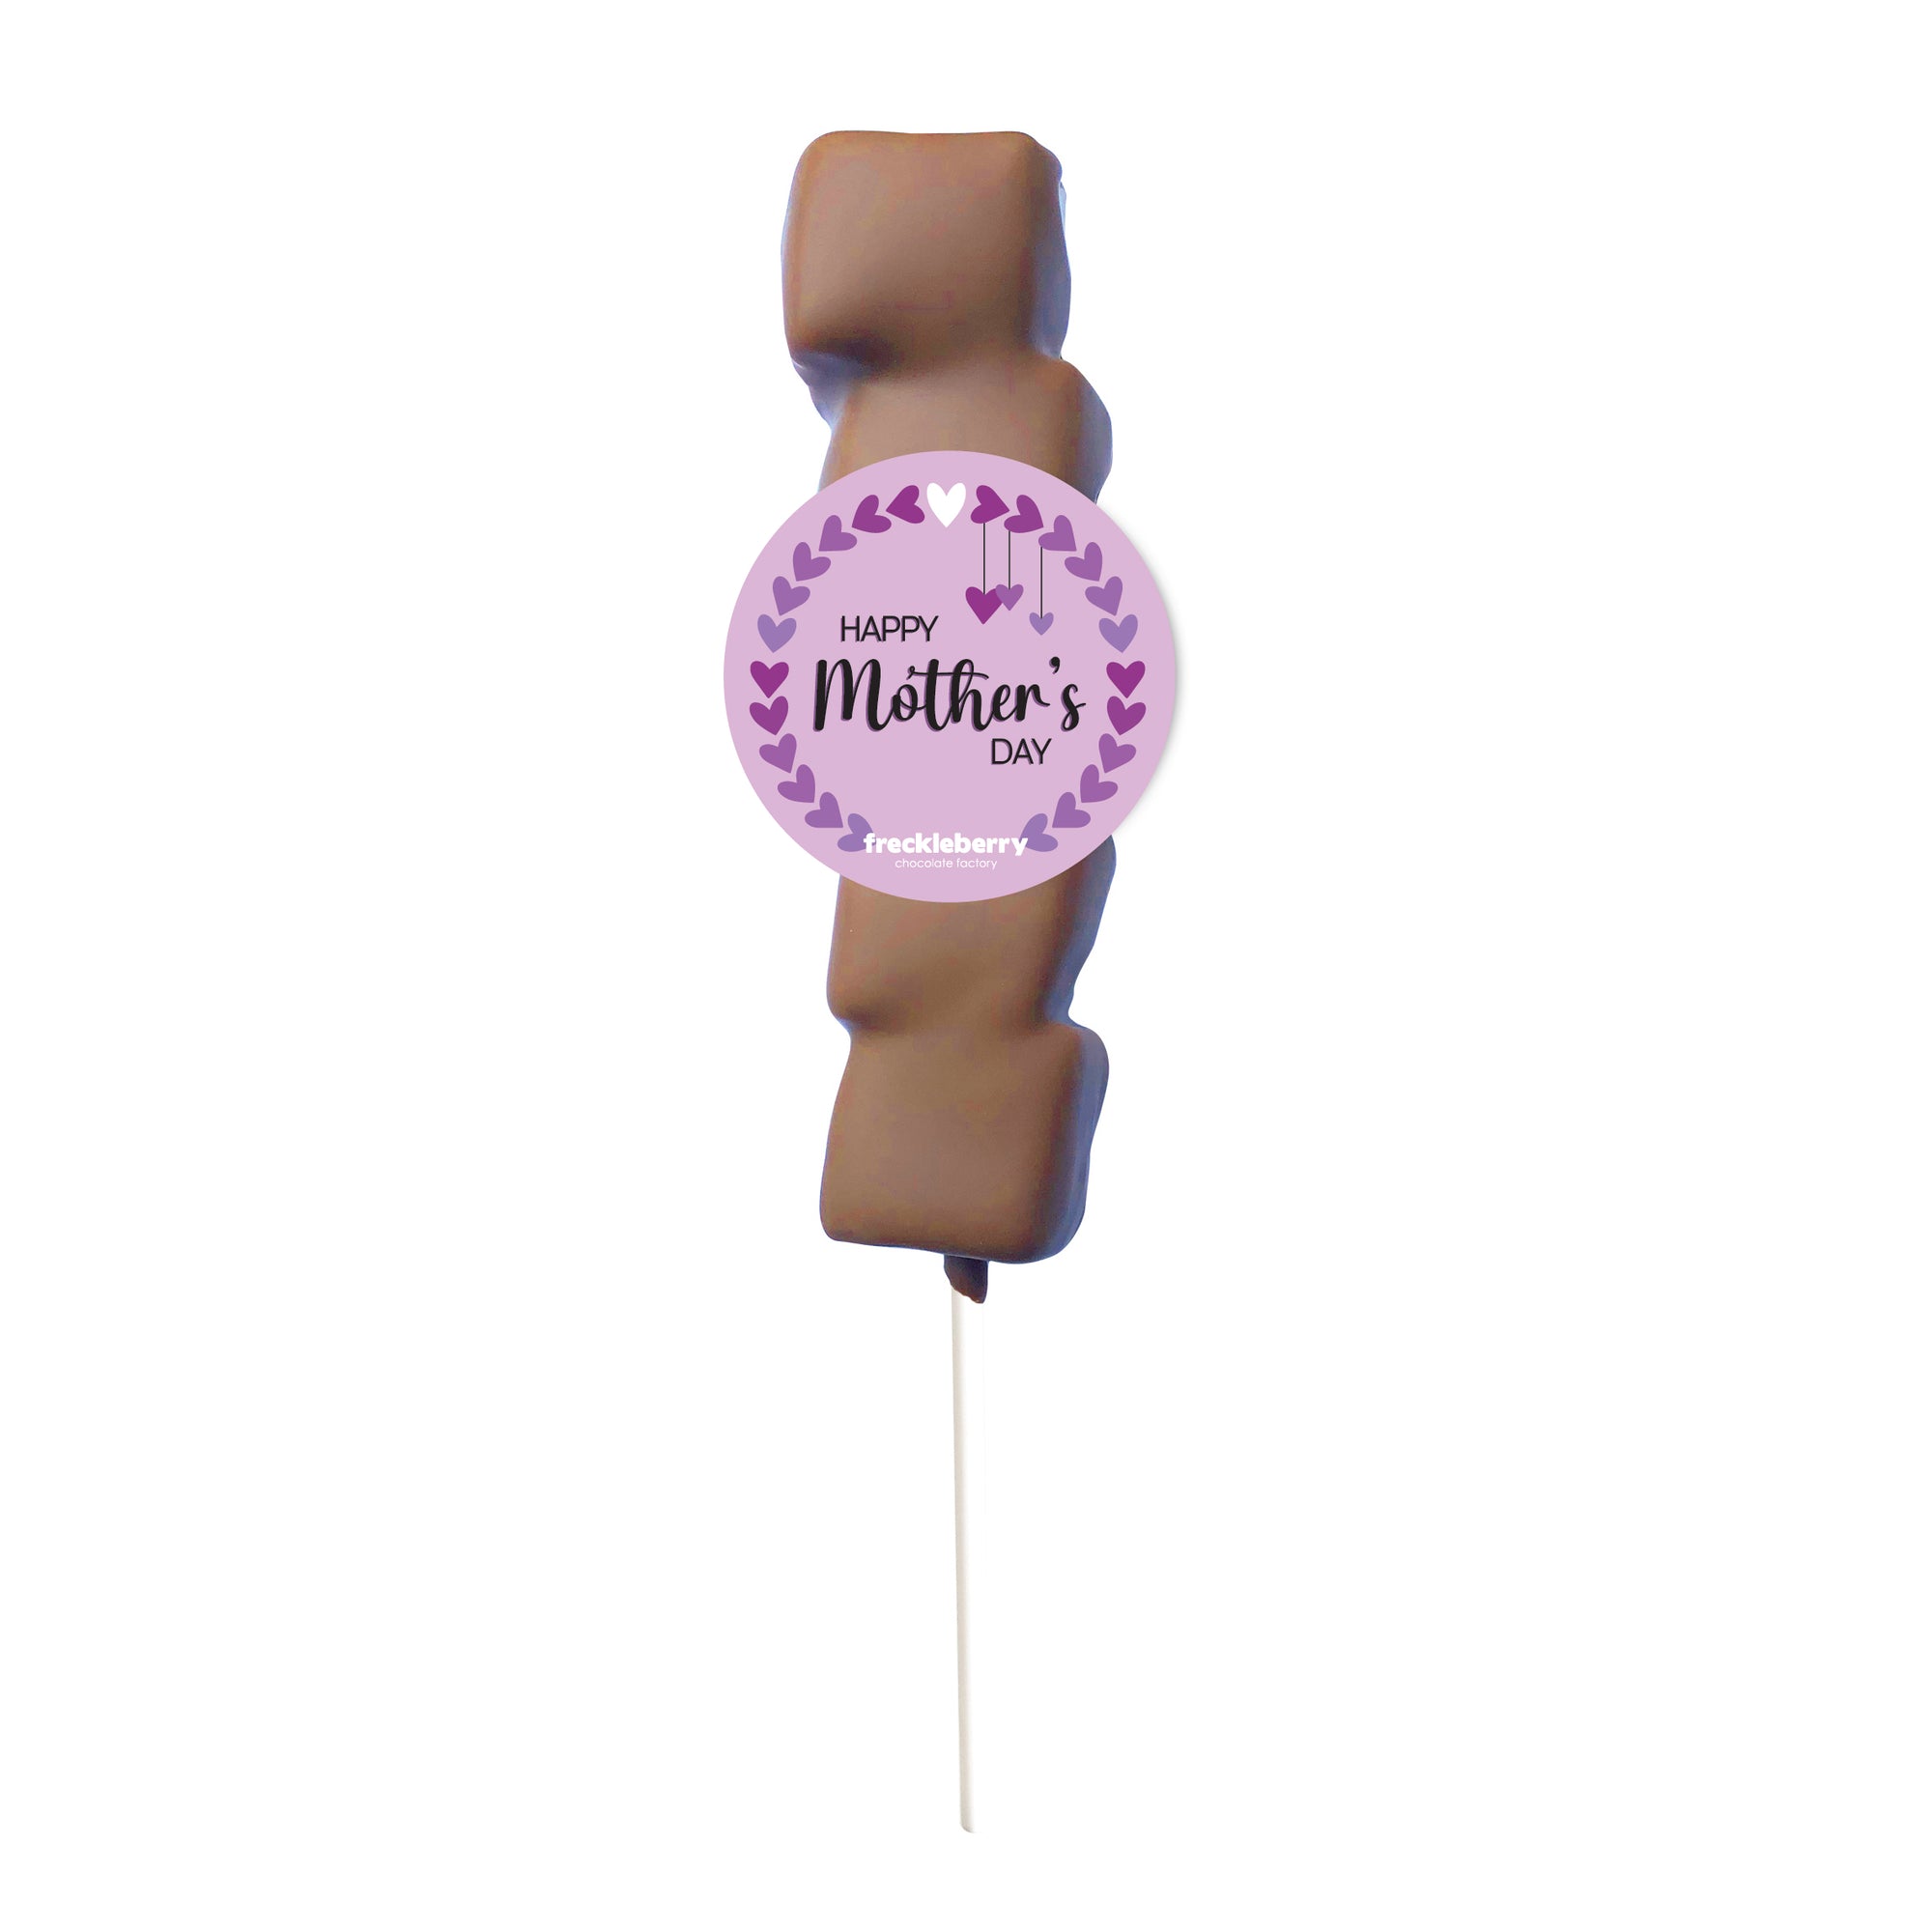 Mallow Pop - Mother's Day